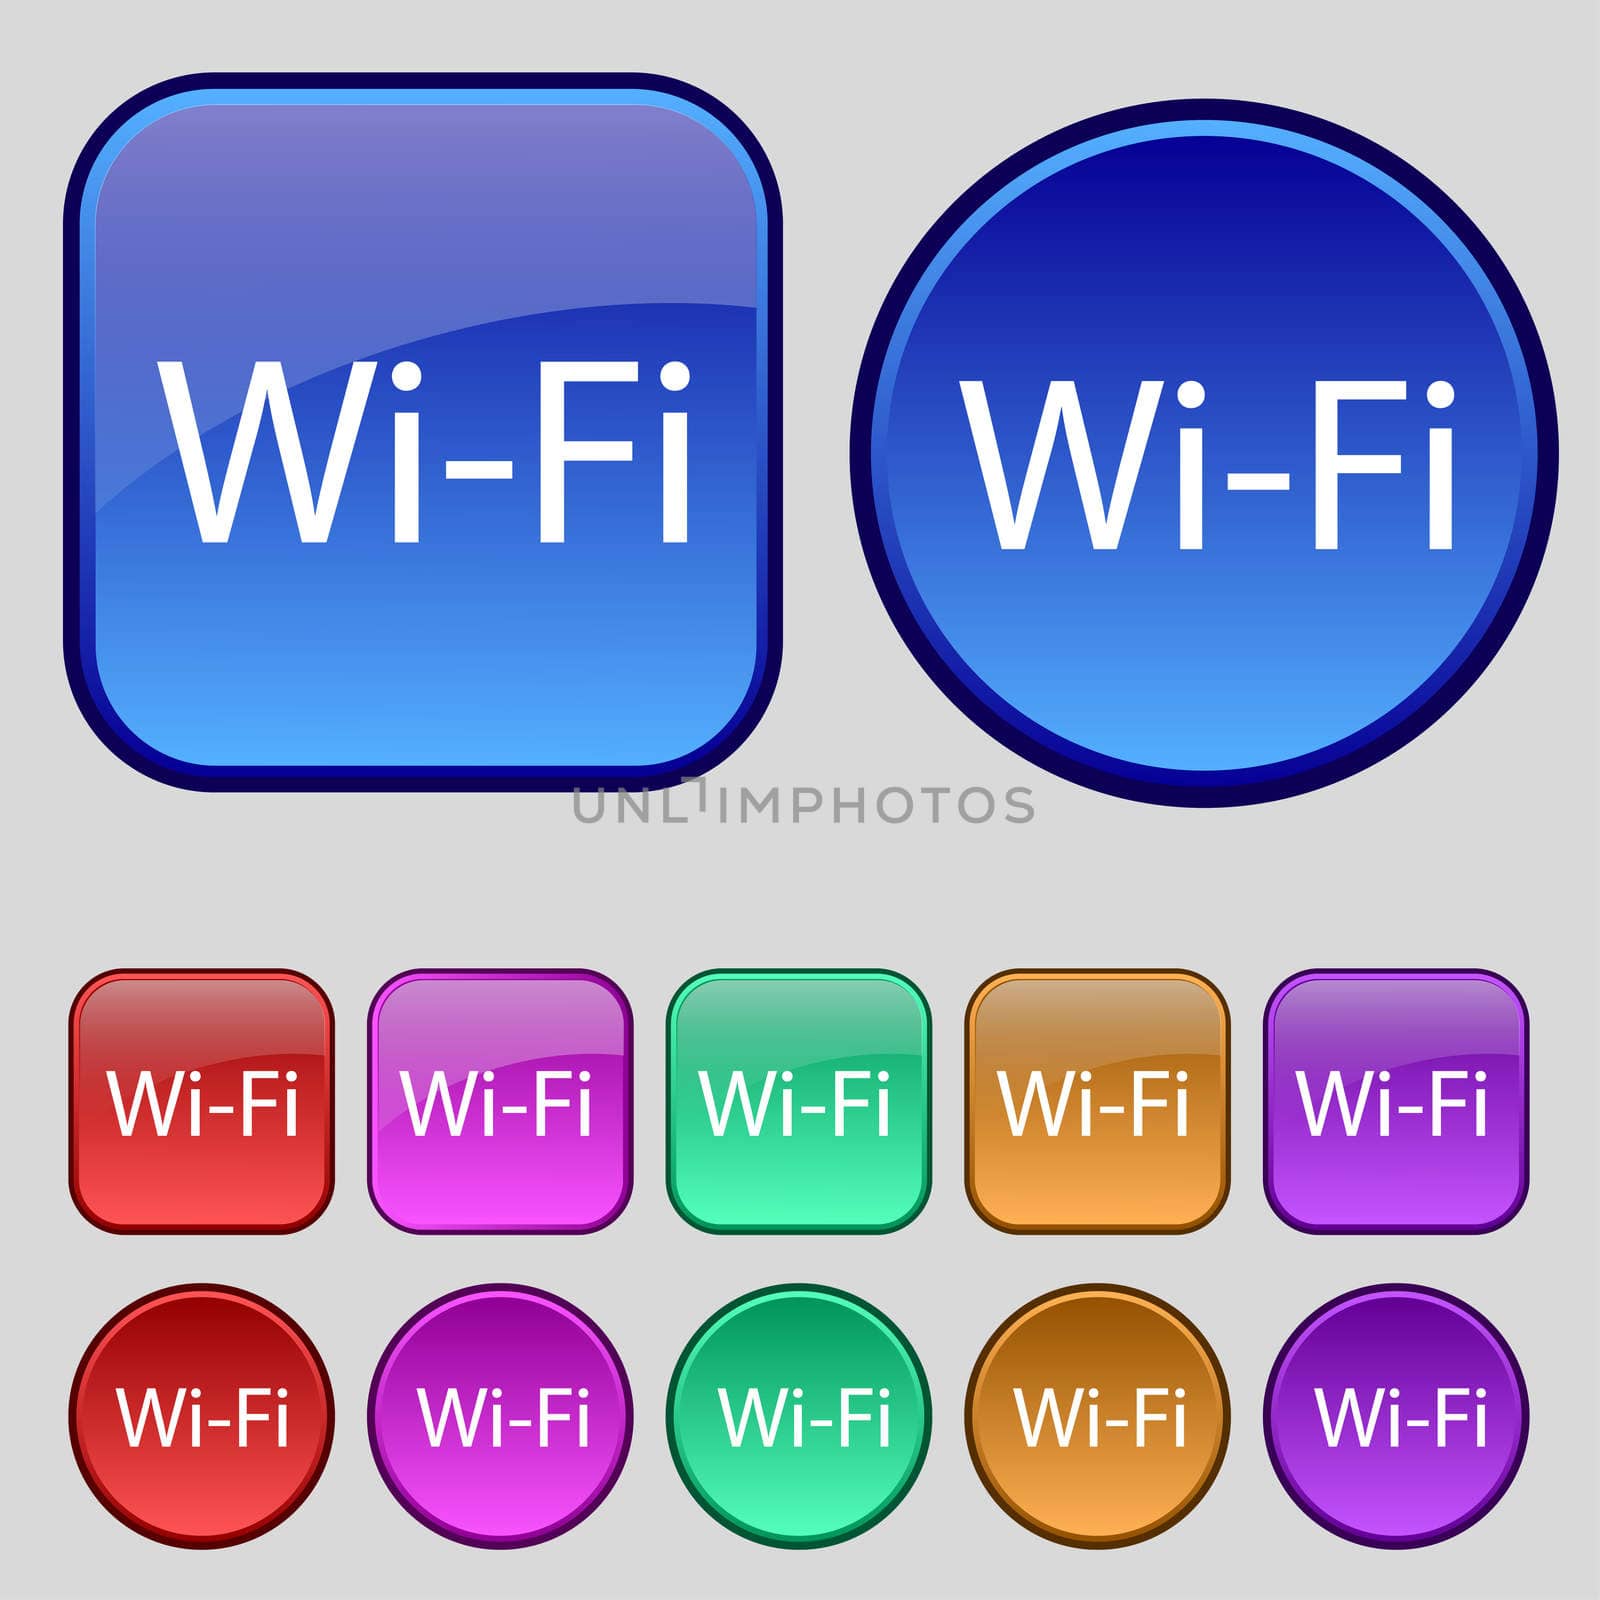 Free wifi sign. Wi-fi symbol. Wireless Network icon Set of colored buttons. illustration